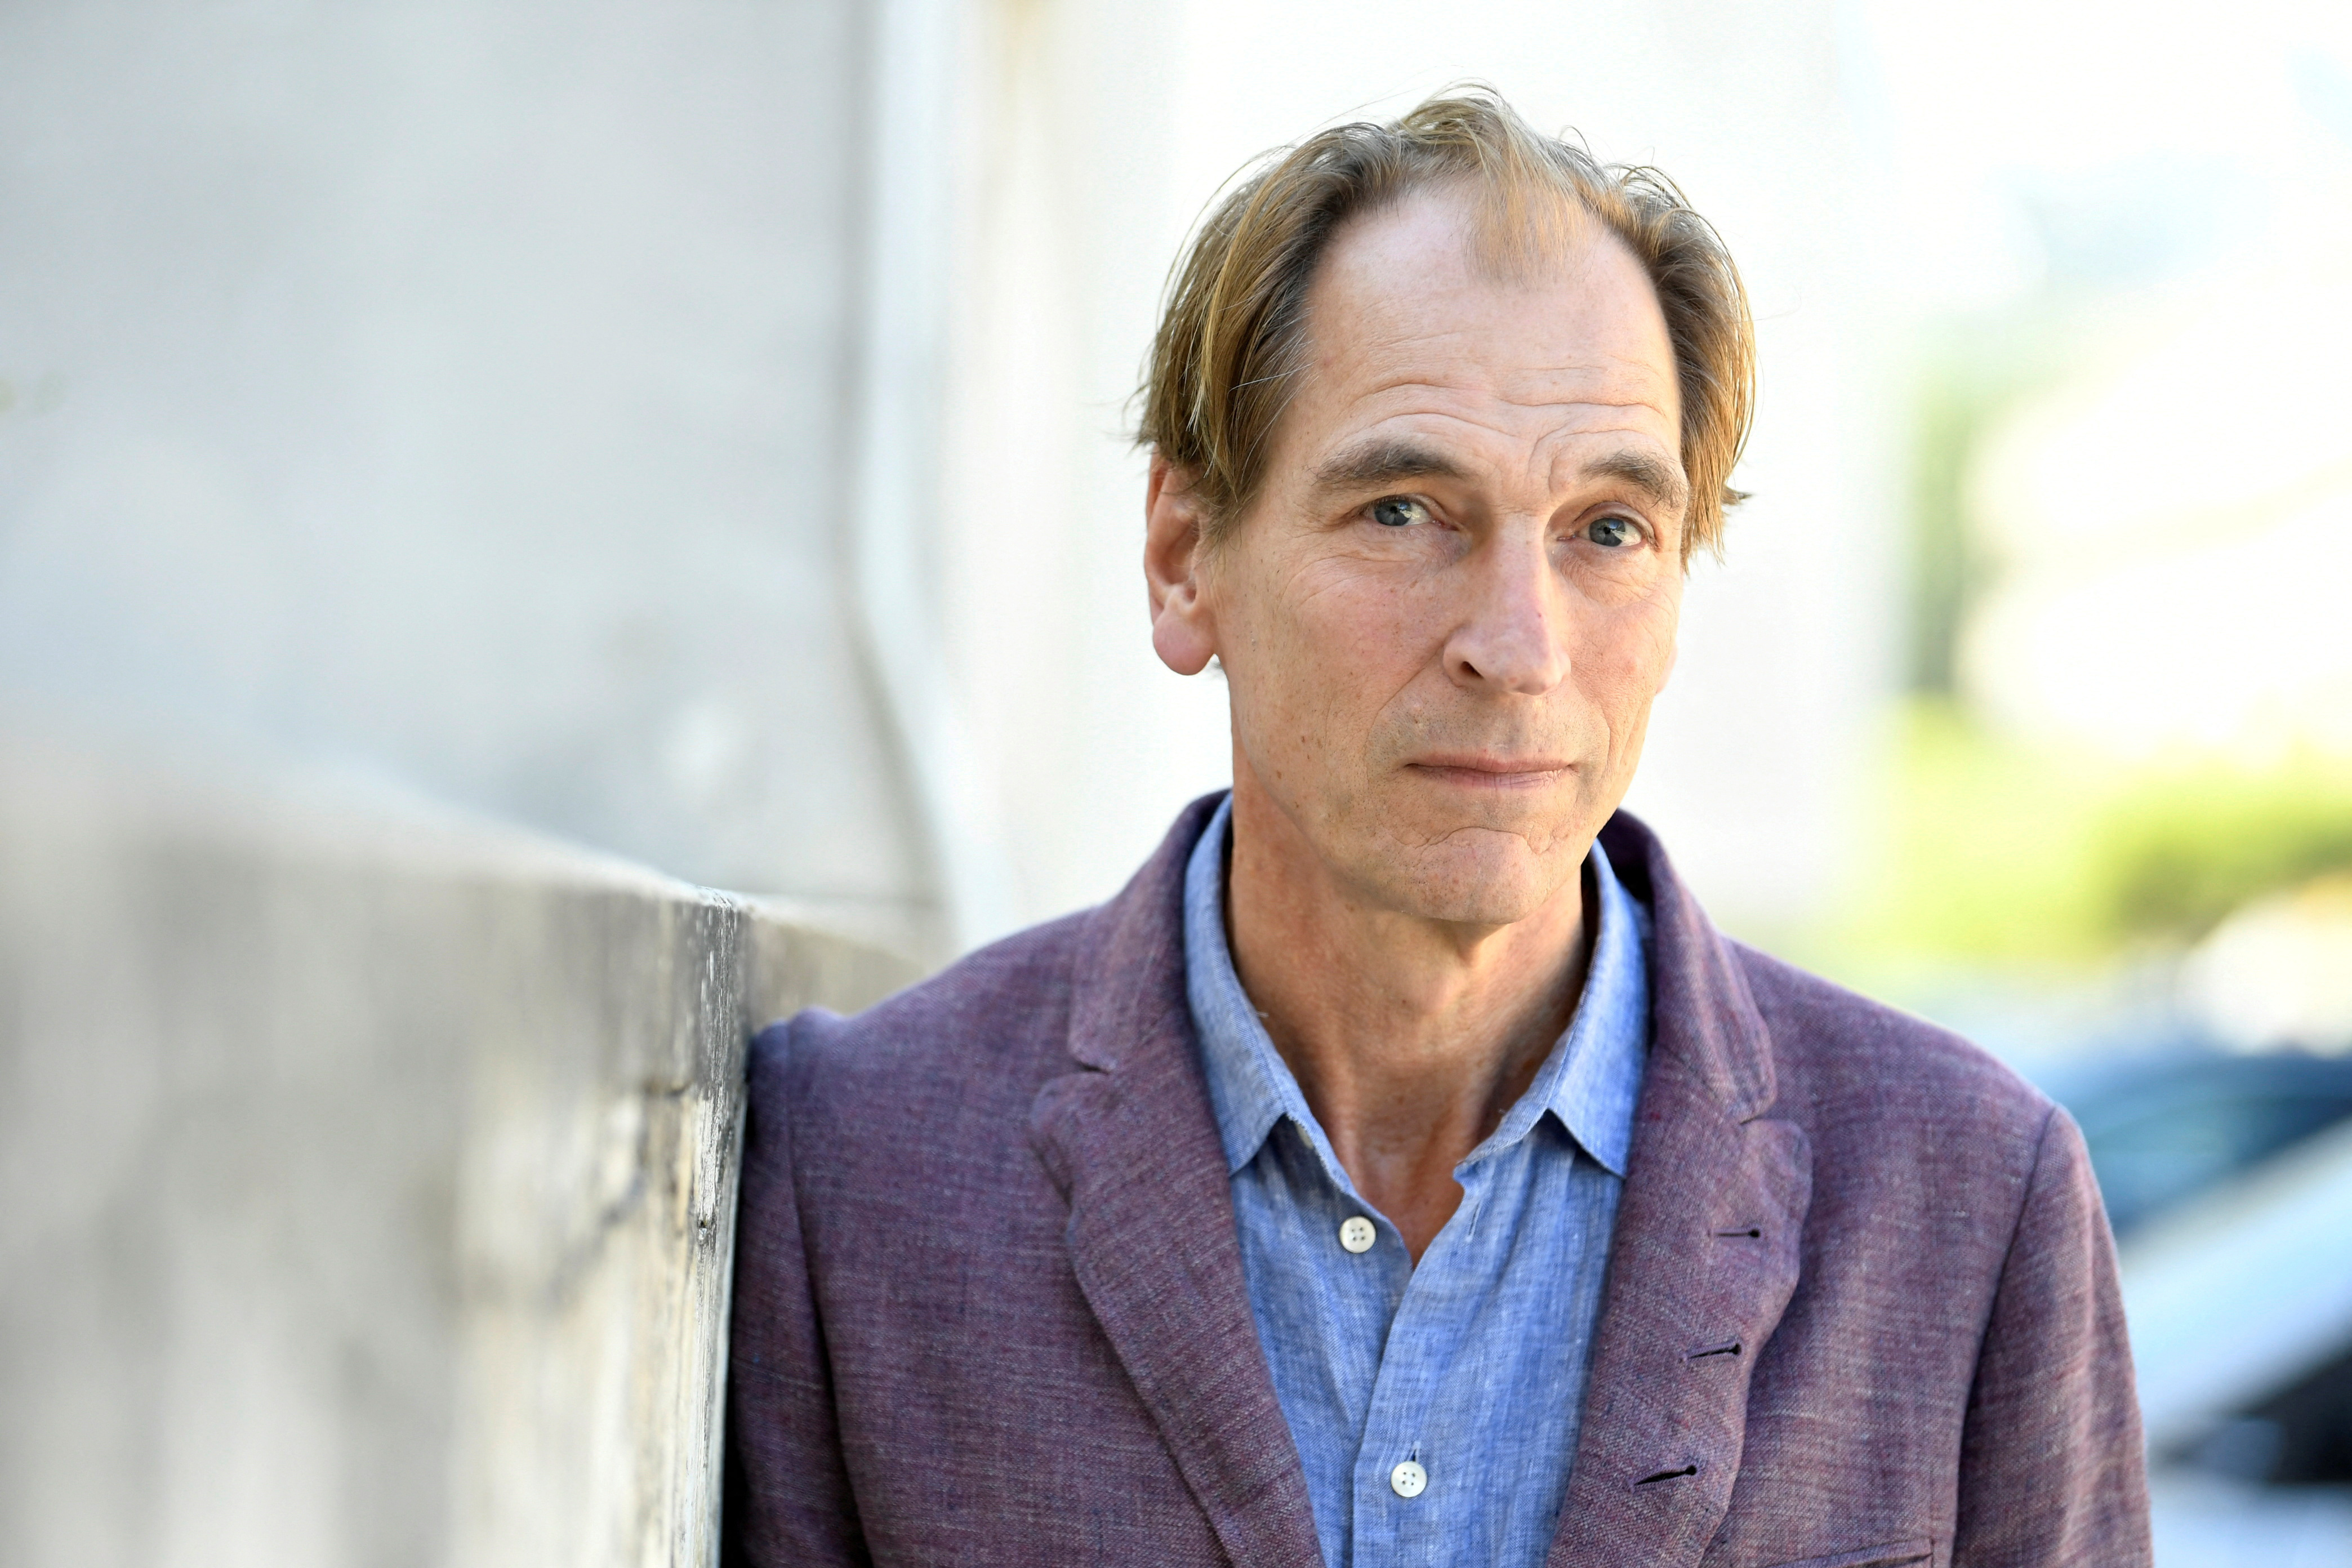 No sign of British actor Julian Sands after 6 days missing in California mountains | Reuters